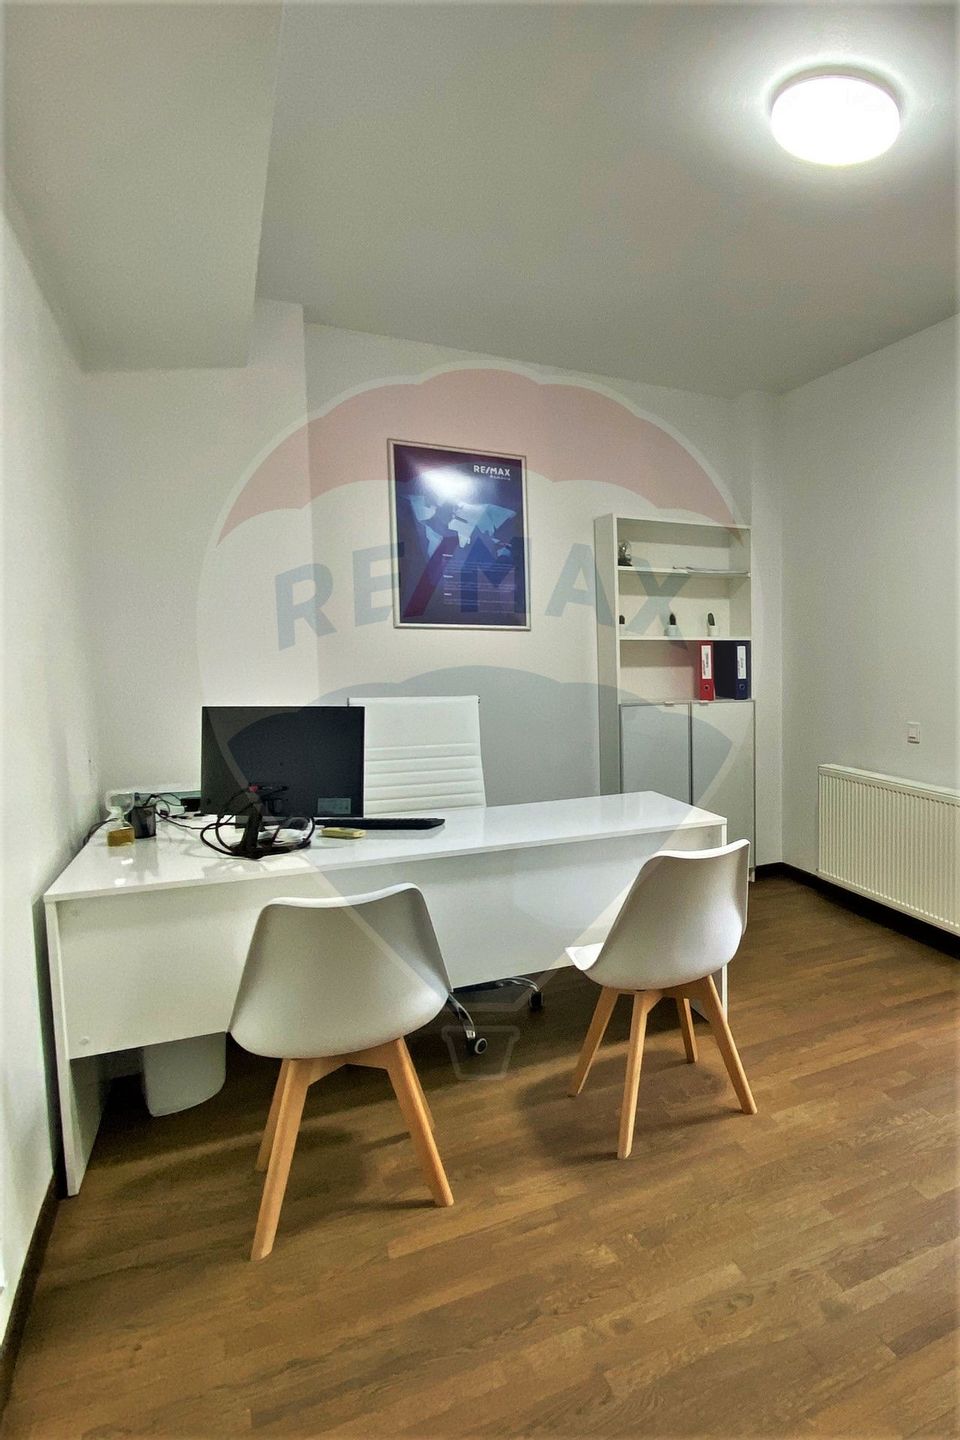 115.37sq.m Office Space for rent, Baneasa area